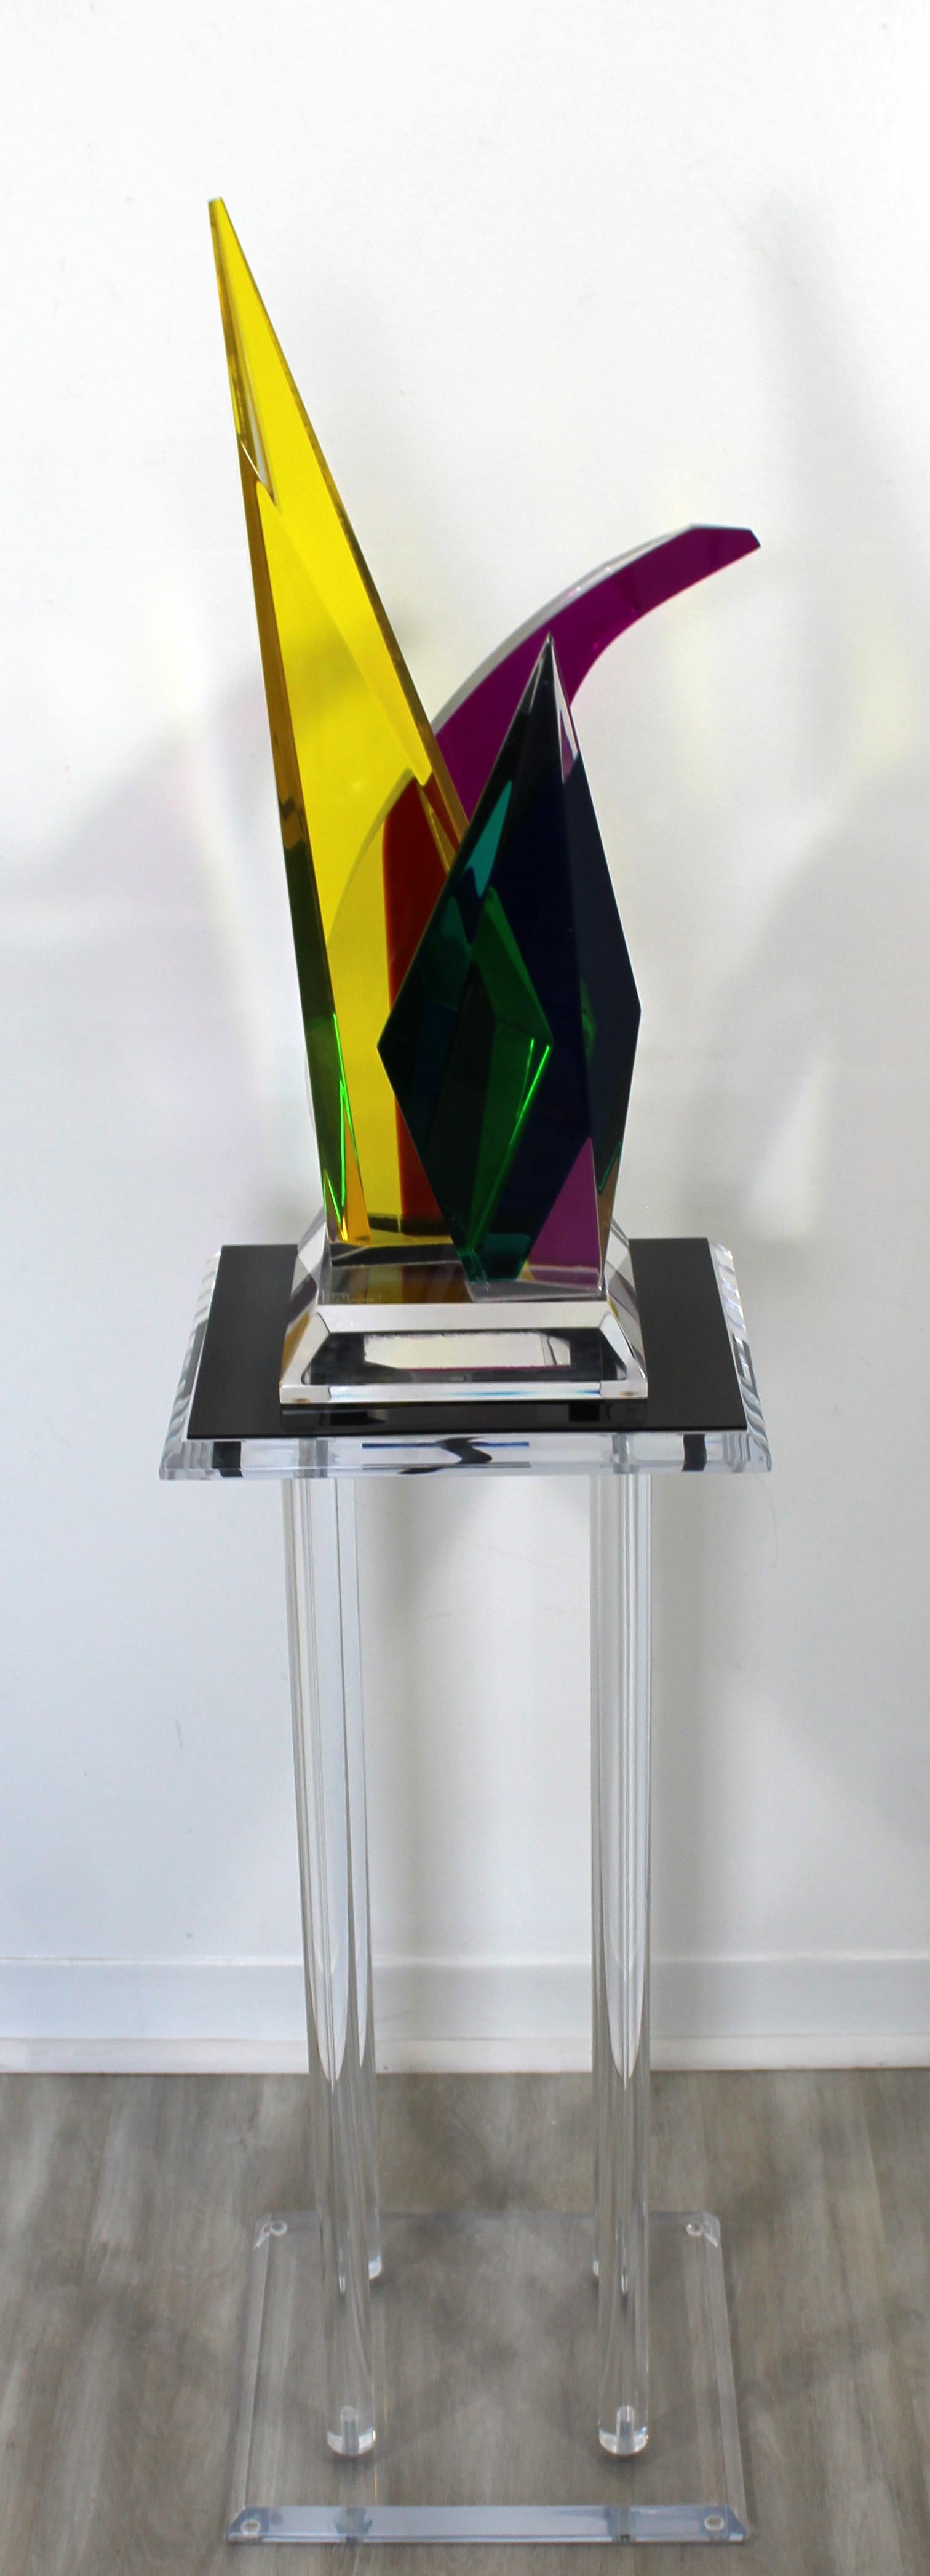 For your consideration is an incredible, three color, abstract lucite table sculpture and base, signed by Shlomi Haziza. In excellent condition. The dimensions of the base are 13